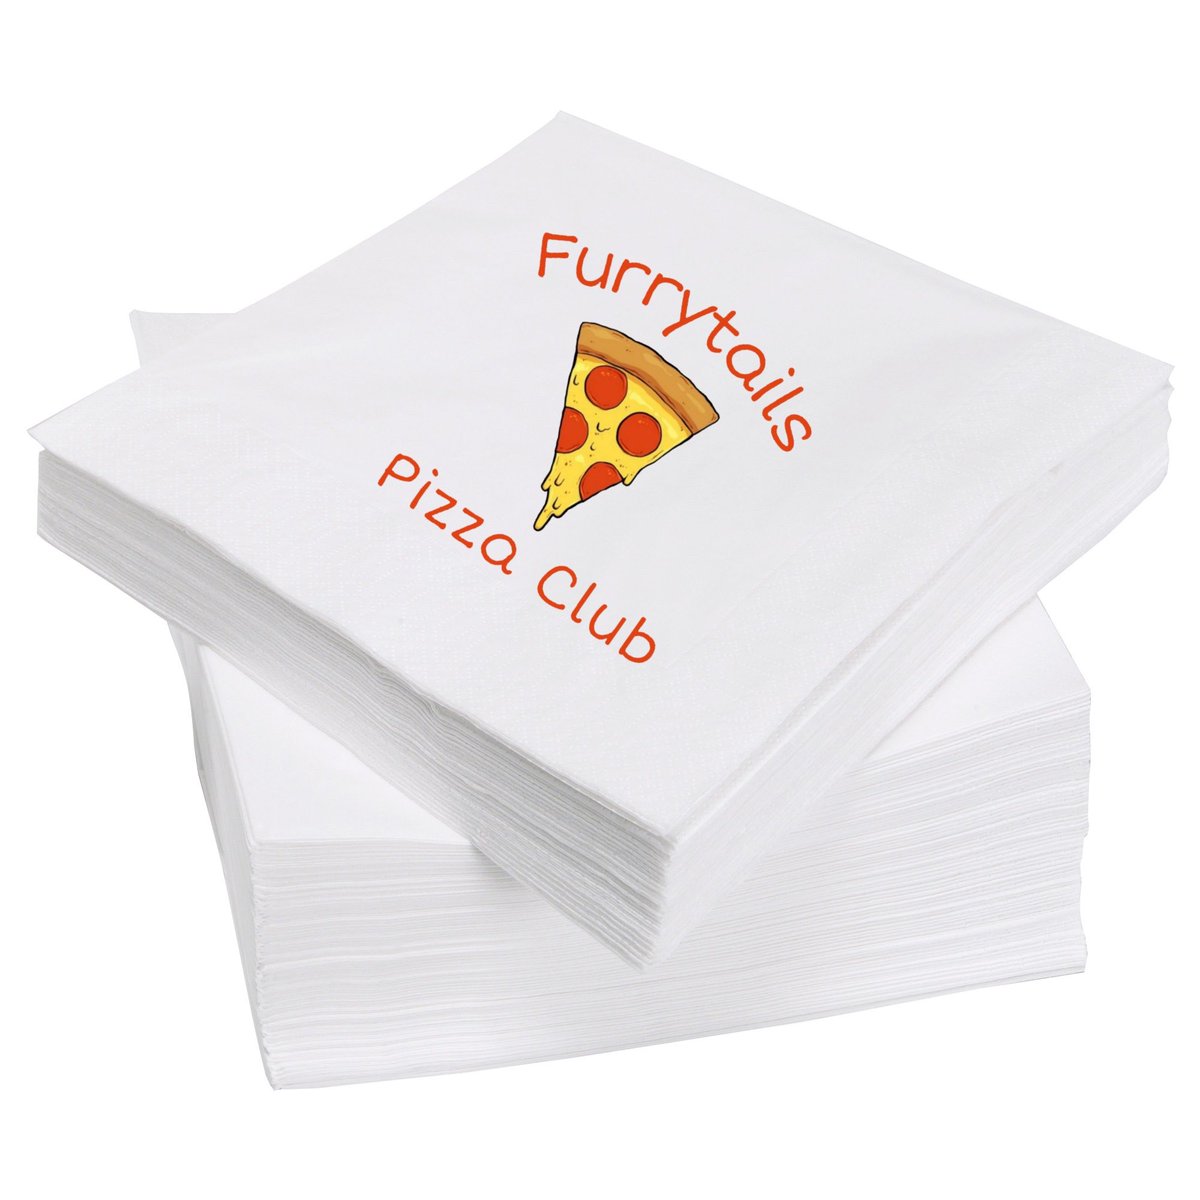 @annin328 @CartertheD Do you need napkins? #FurryTails